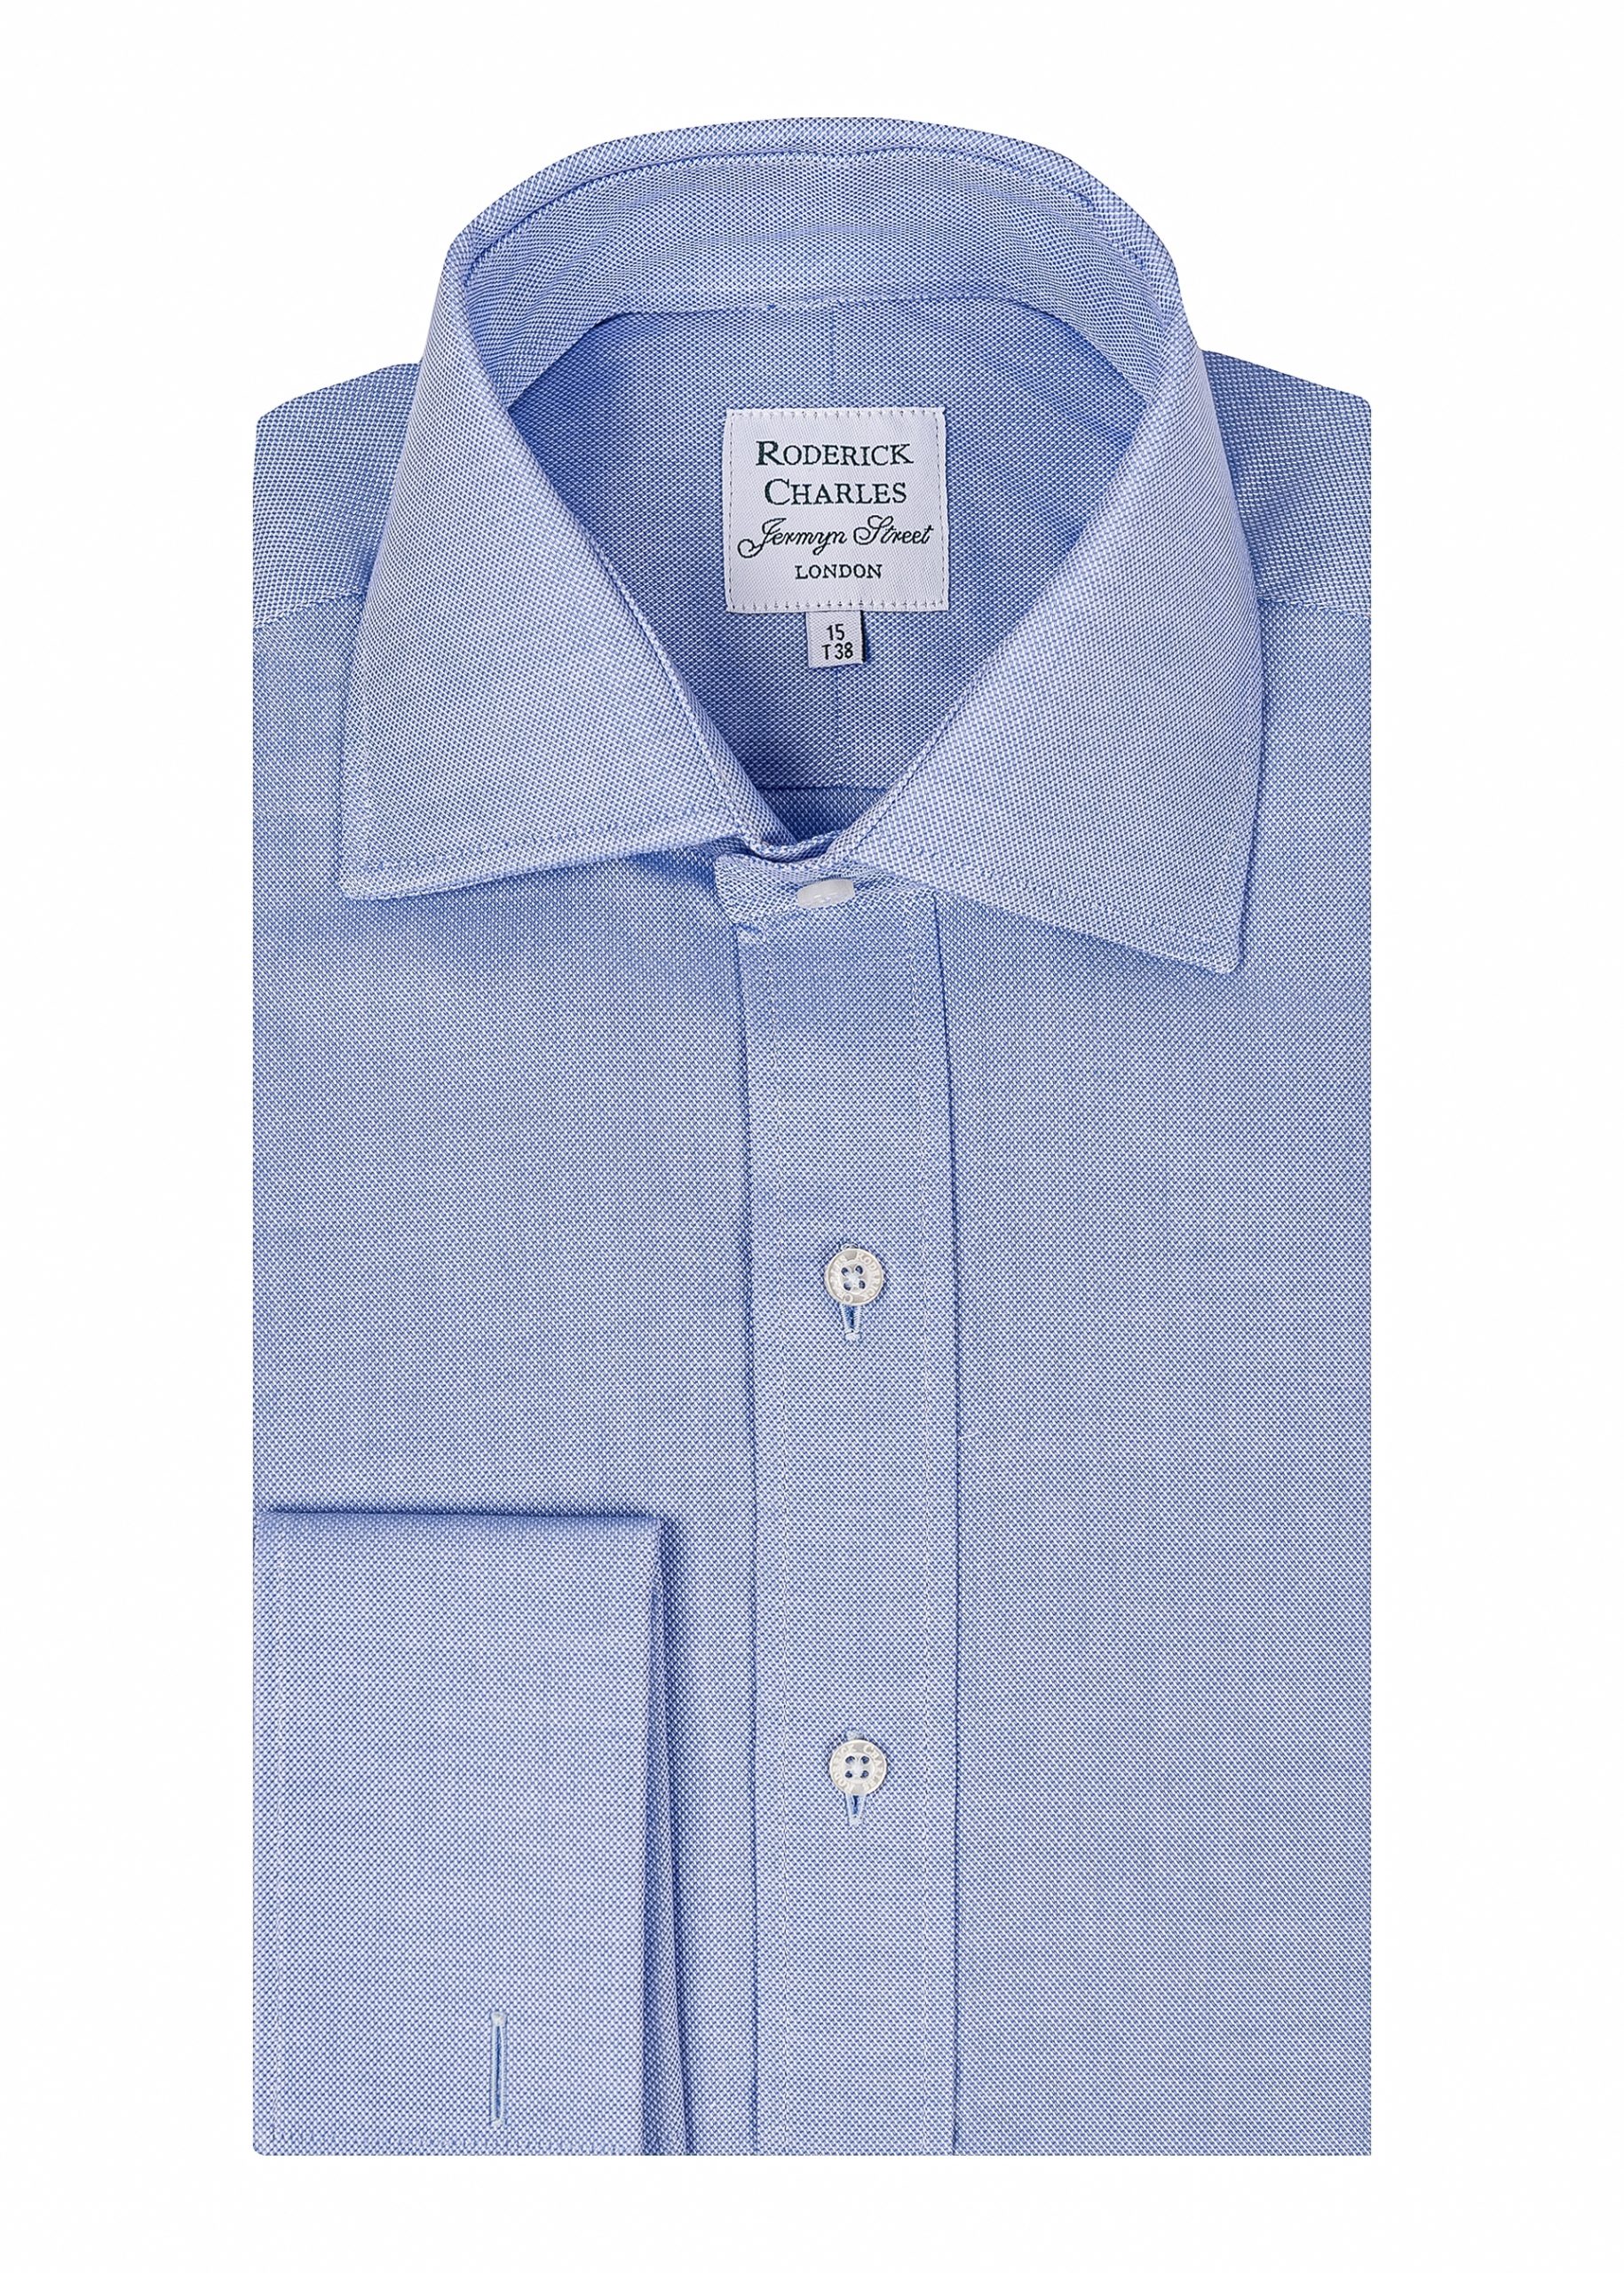 Roderick Charles blue oxford double cuff shirt